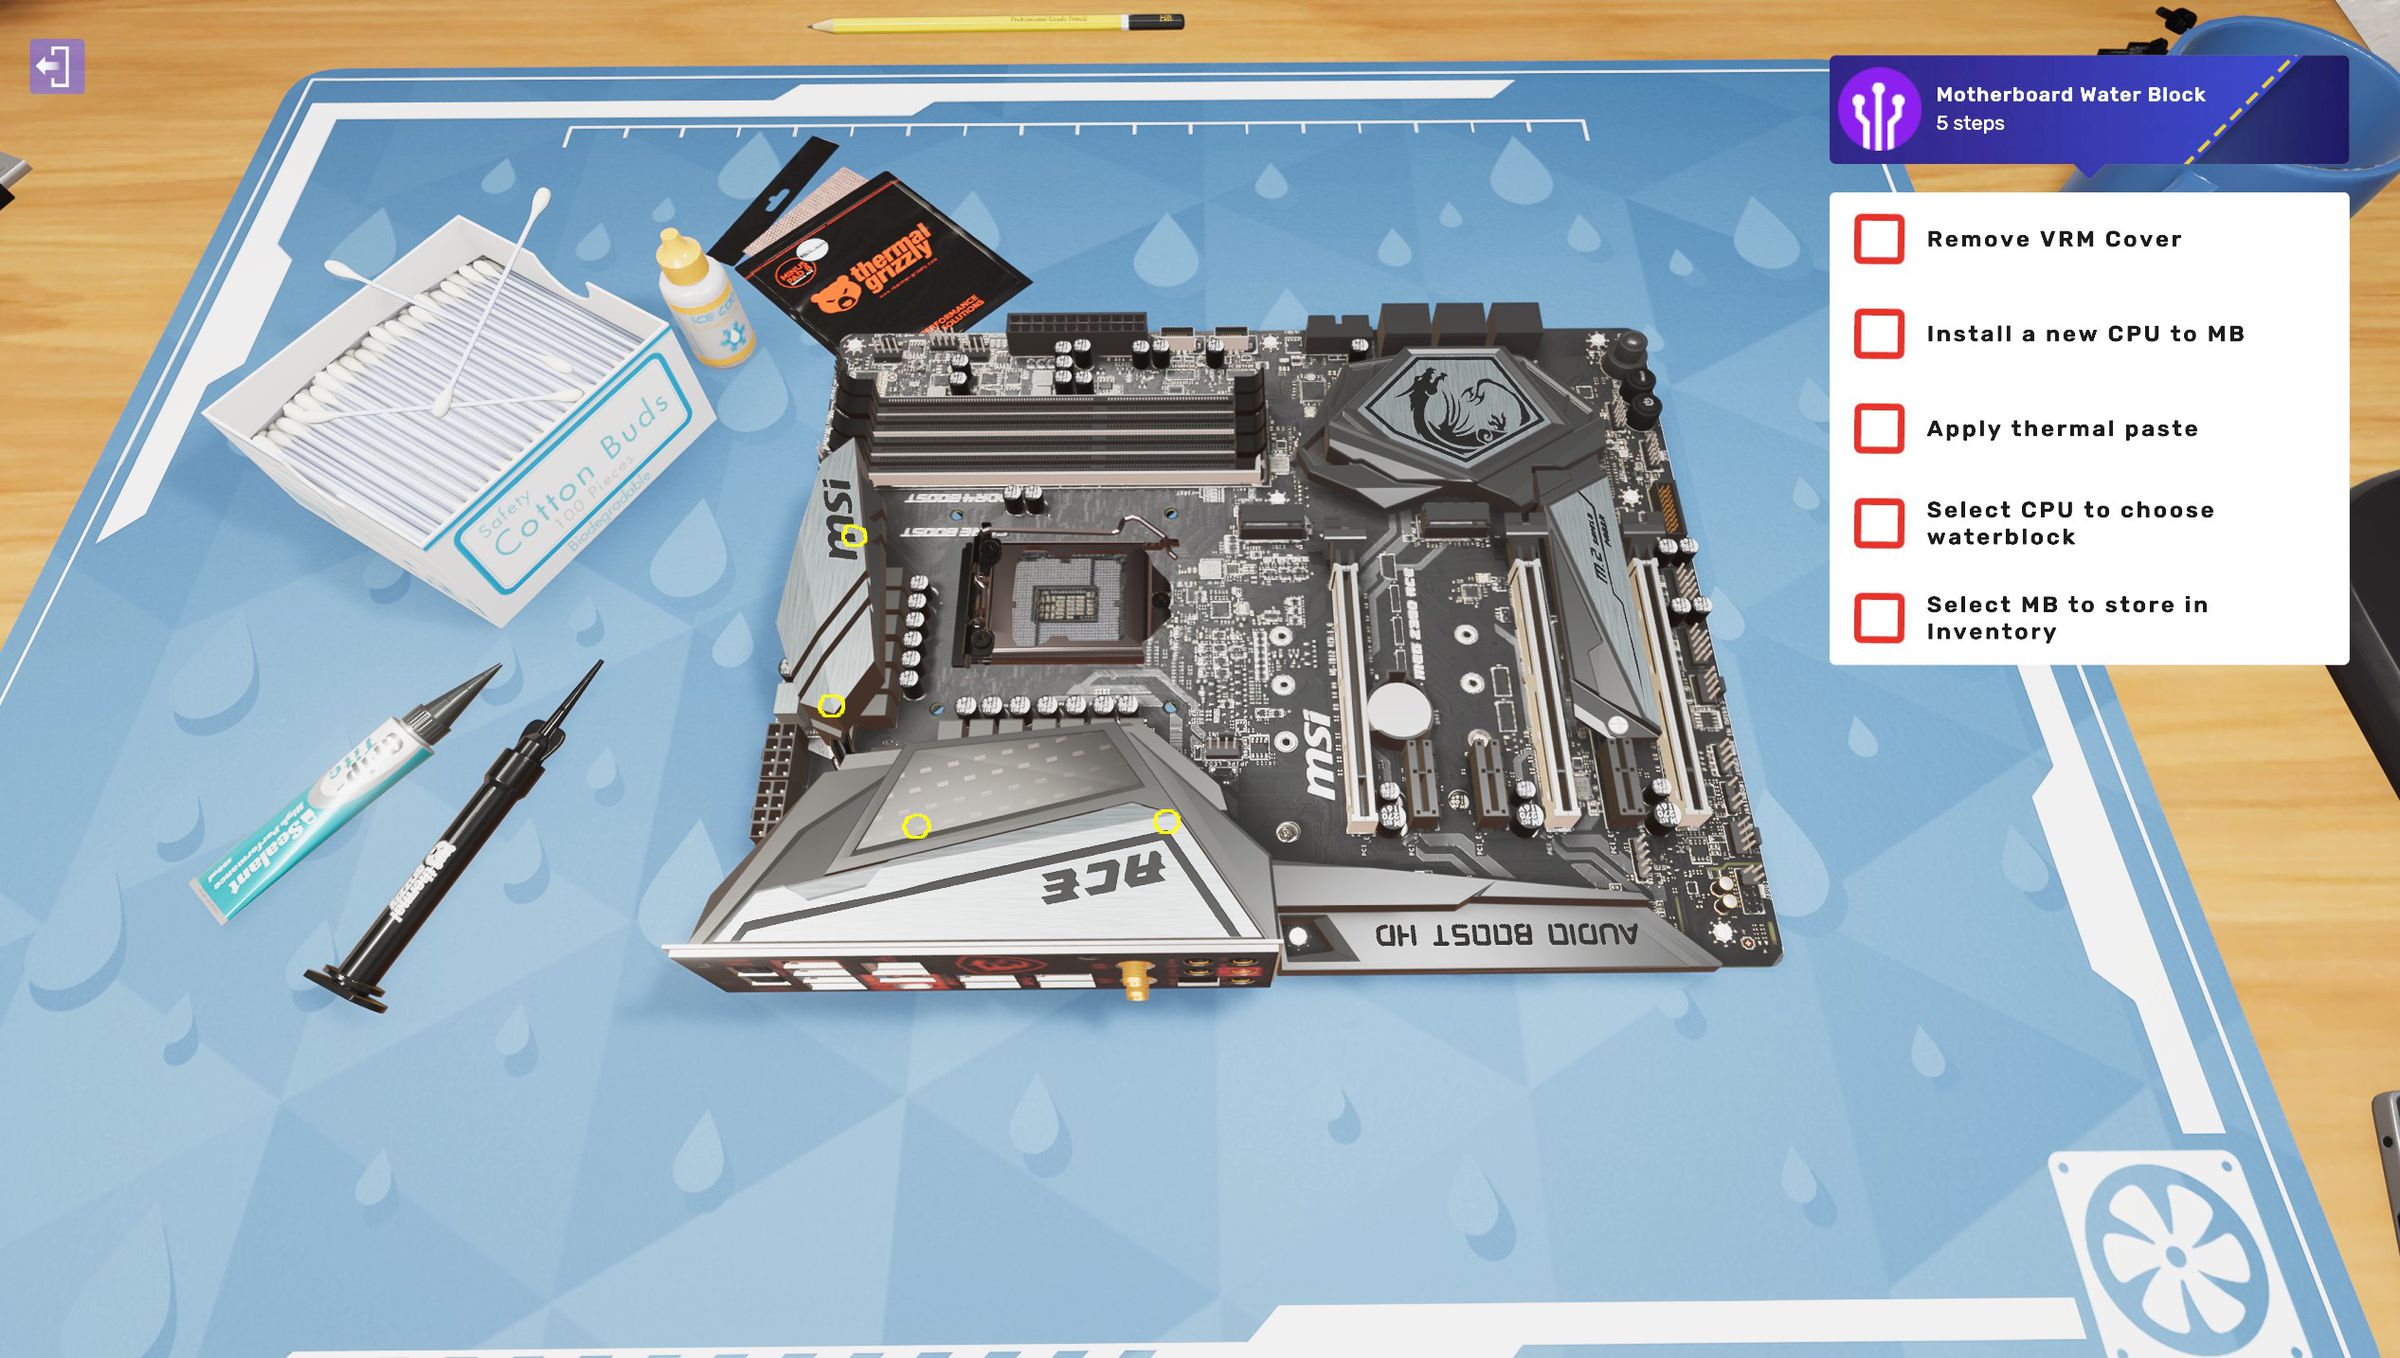 A screenshot of PC Building Simulator 2, showing the process of water-cooling a motherboard.